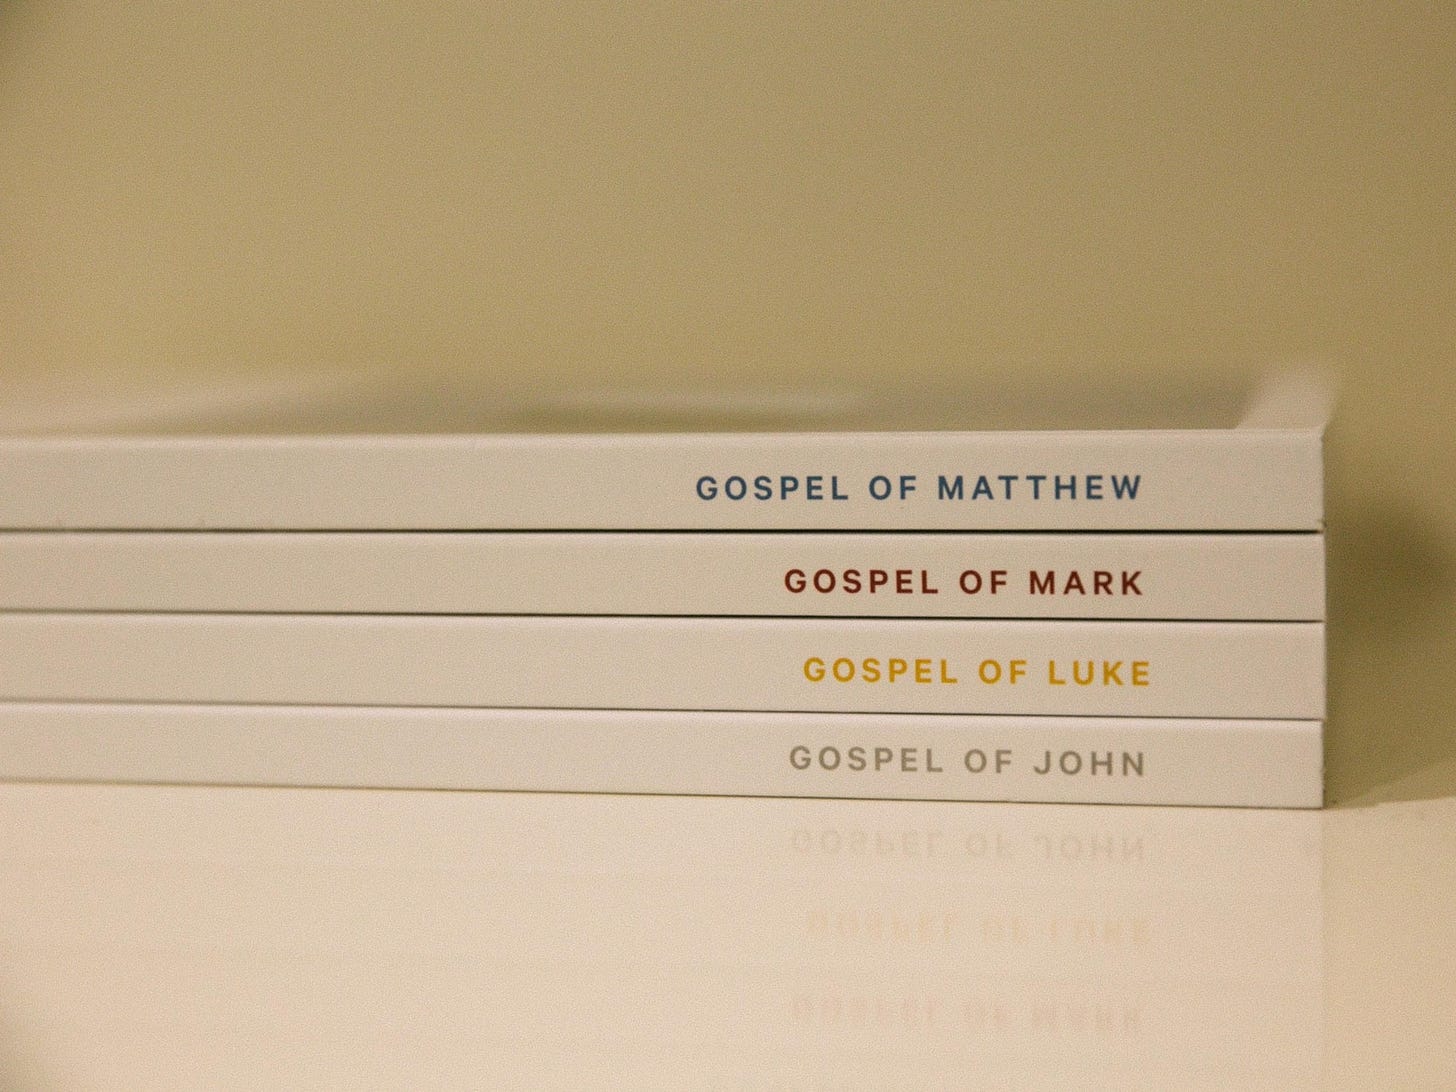 Themes of the Four Gospels